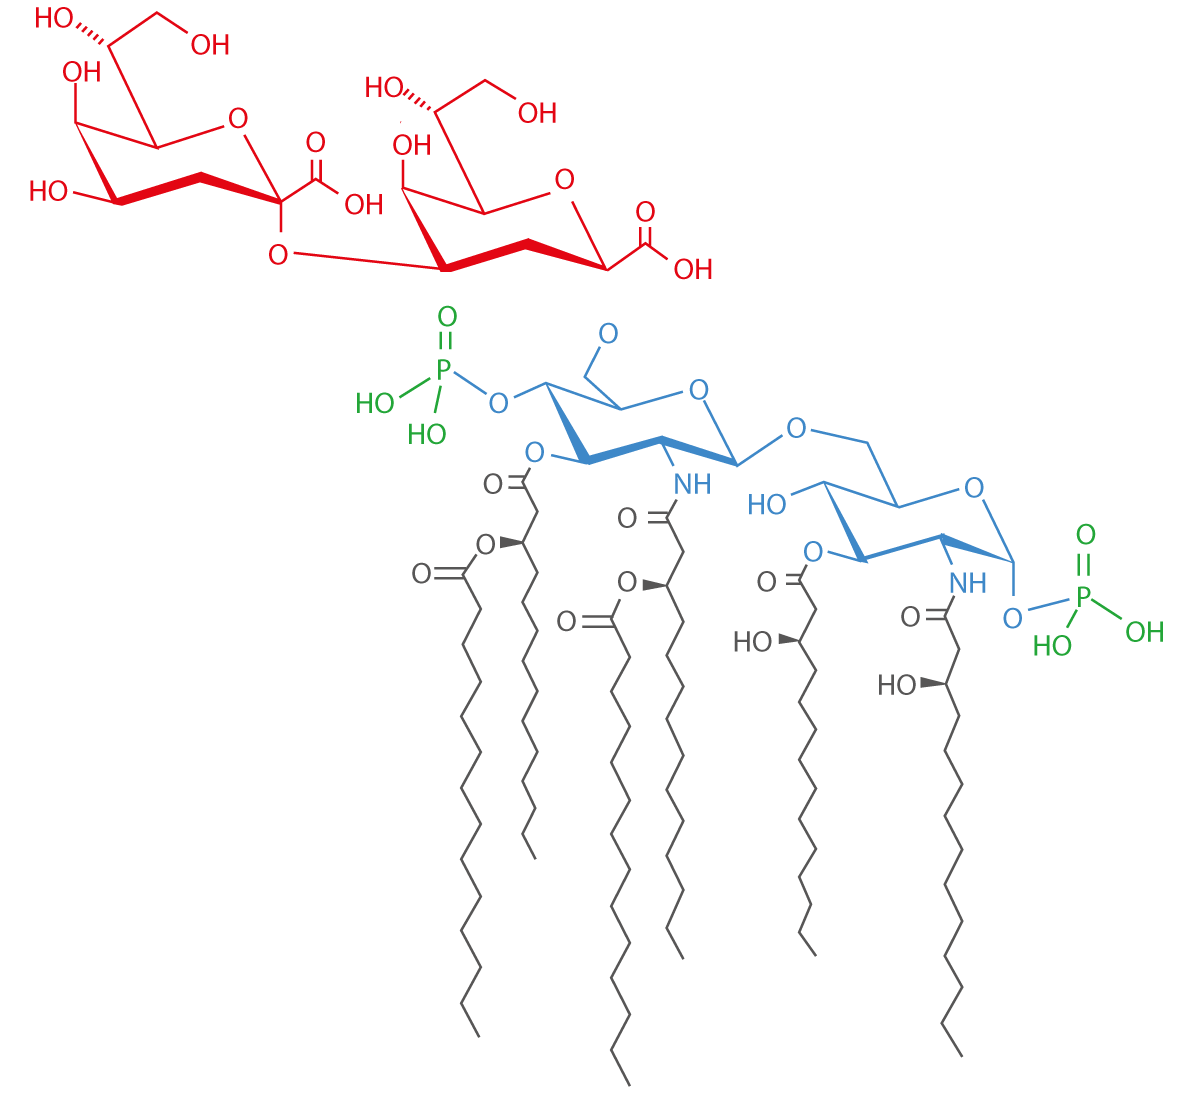 Fig. 1: Structure of the (3-deoxy-D-manno-octulosonic acid)2 Lipid A endotoxin from E. coli K-12. This ﬁgure is licensed under the Creative Commons Attribution-Share Alike 3.0 Unported licenses and was adapted from: http://www.jlr.org/content/47/5/1097.full.